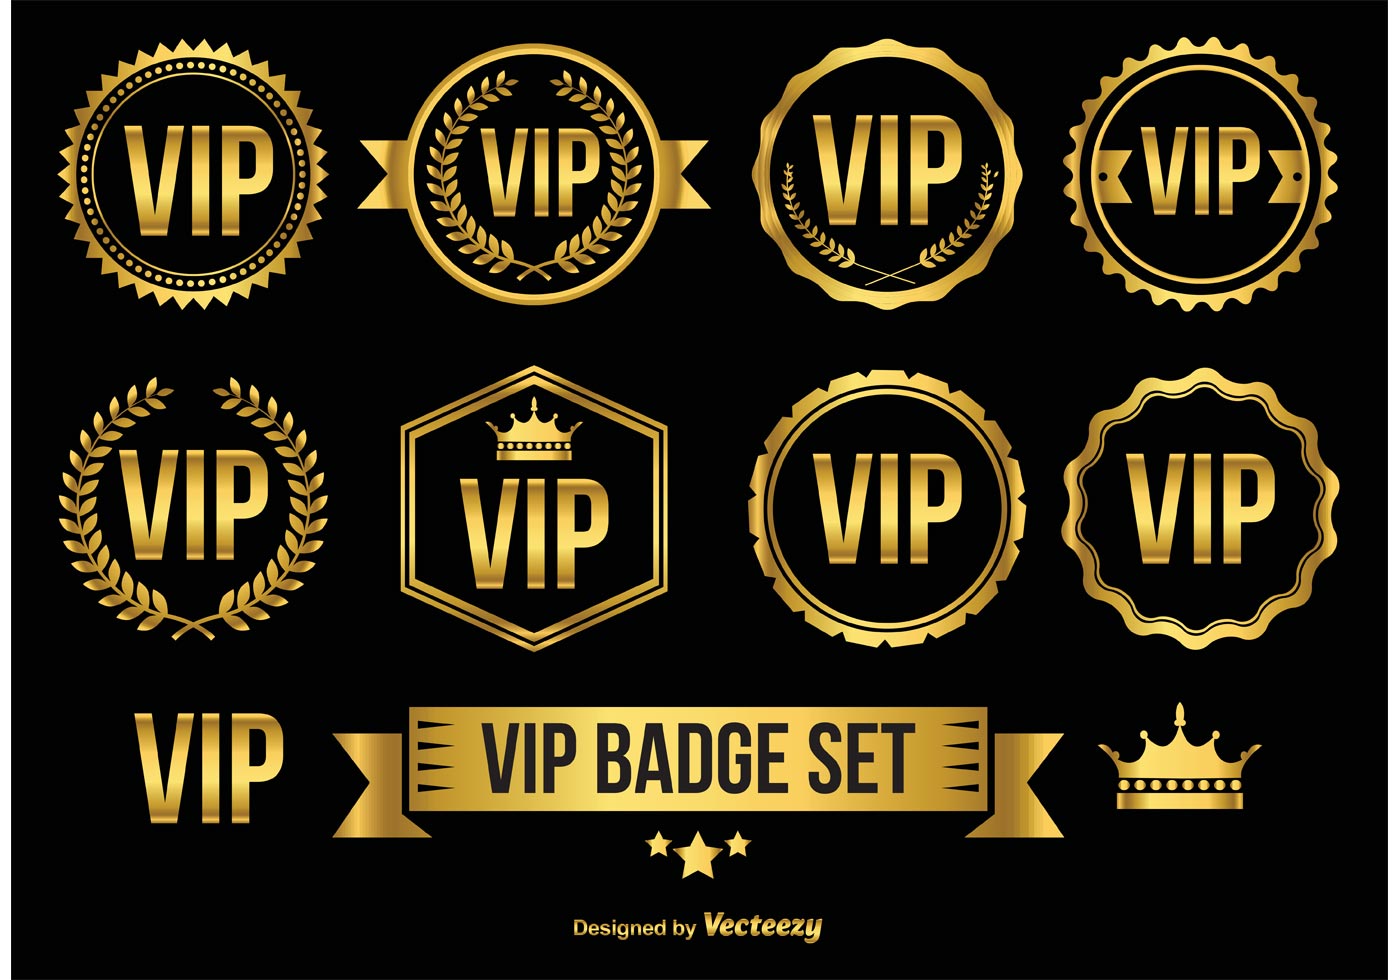 Gold VIP Badges / Icons - Download Free Vector Art, Stock Graphics & Images